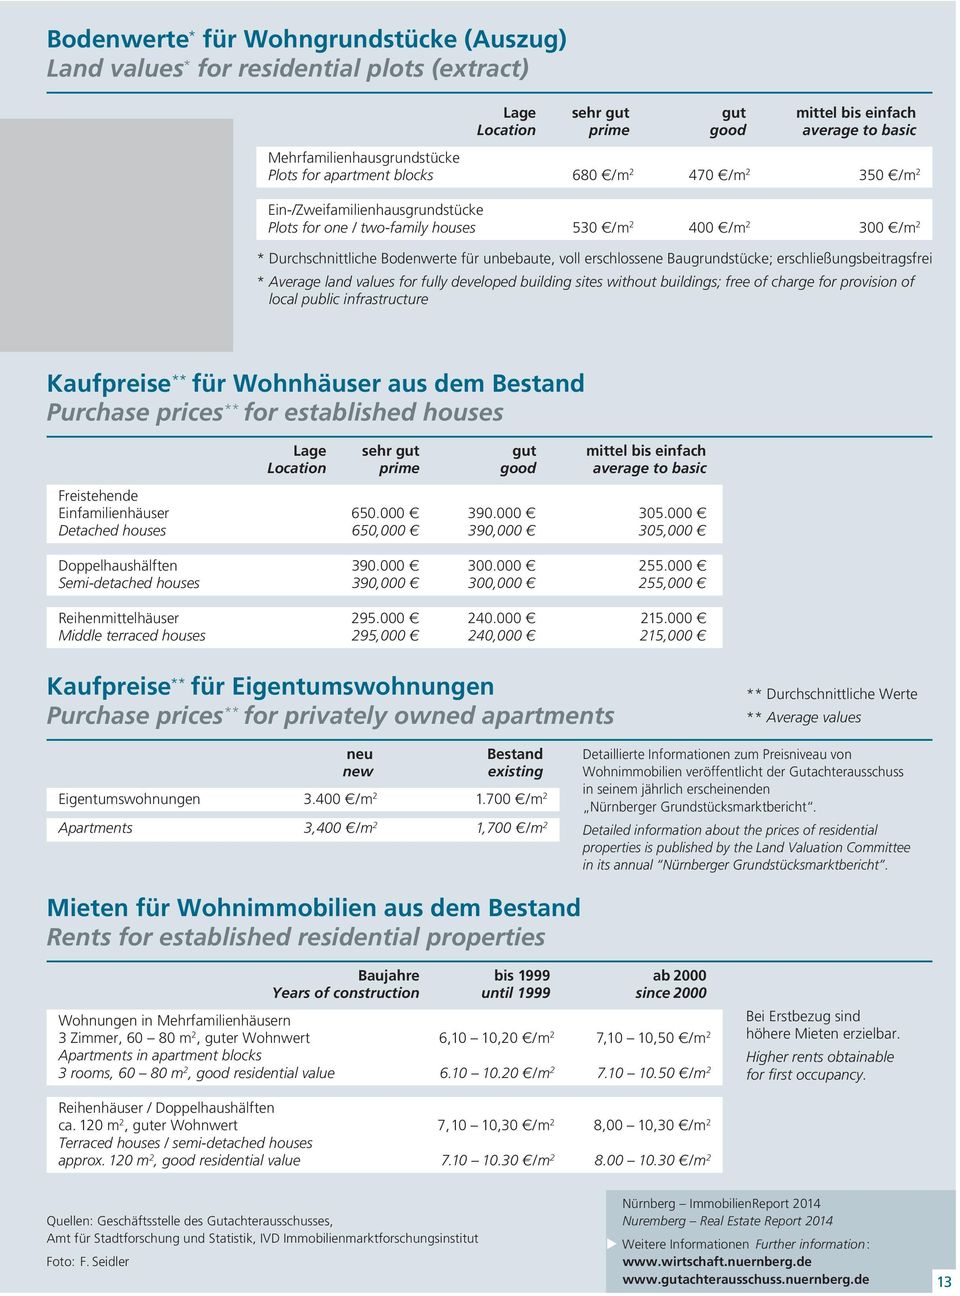 erschließungsbeitragsfrei * Average land values for fully developed building sites without buil dings; free of charge for provision of local public infrastructure Kaufpreise ** für Wohnhäuser aus dem